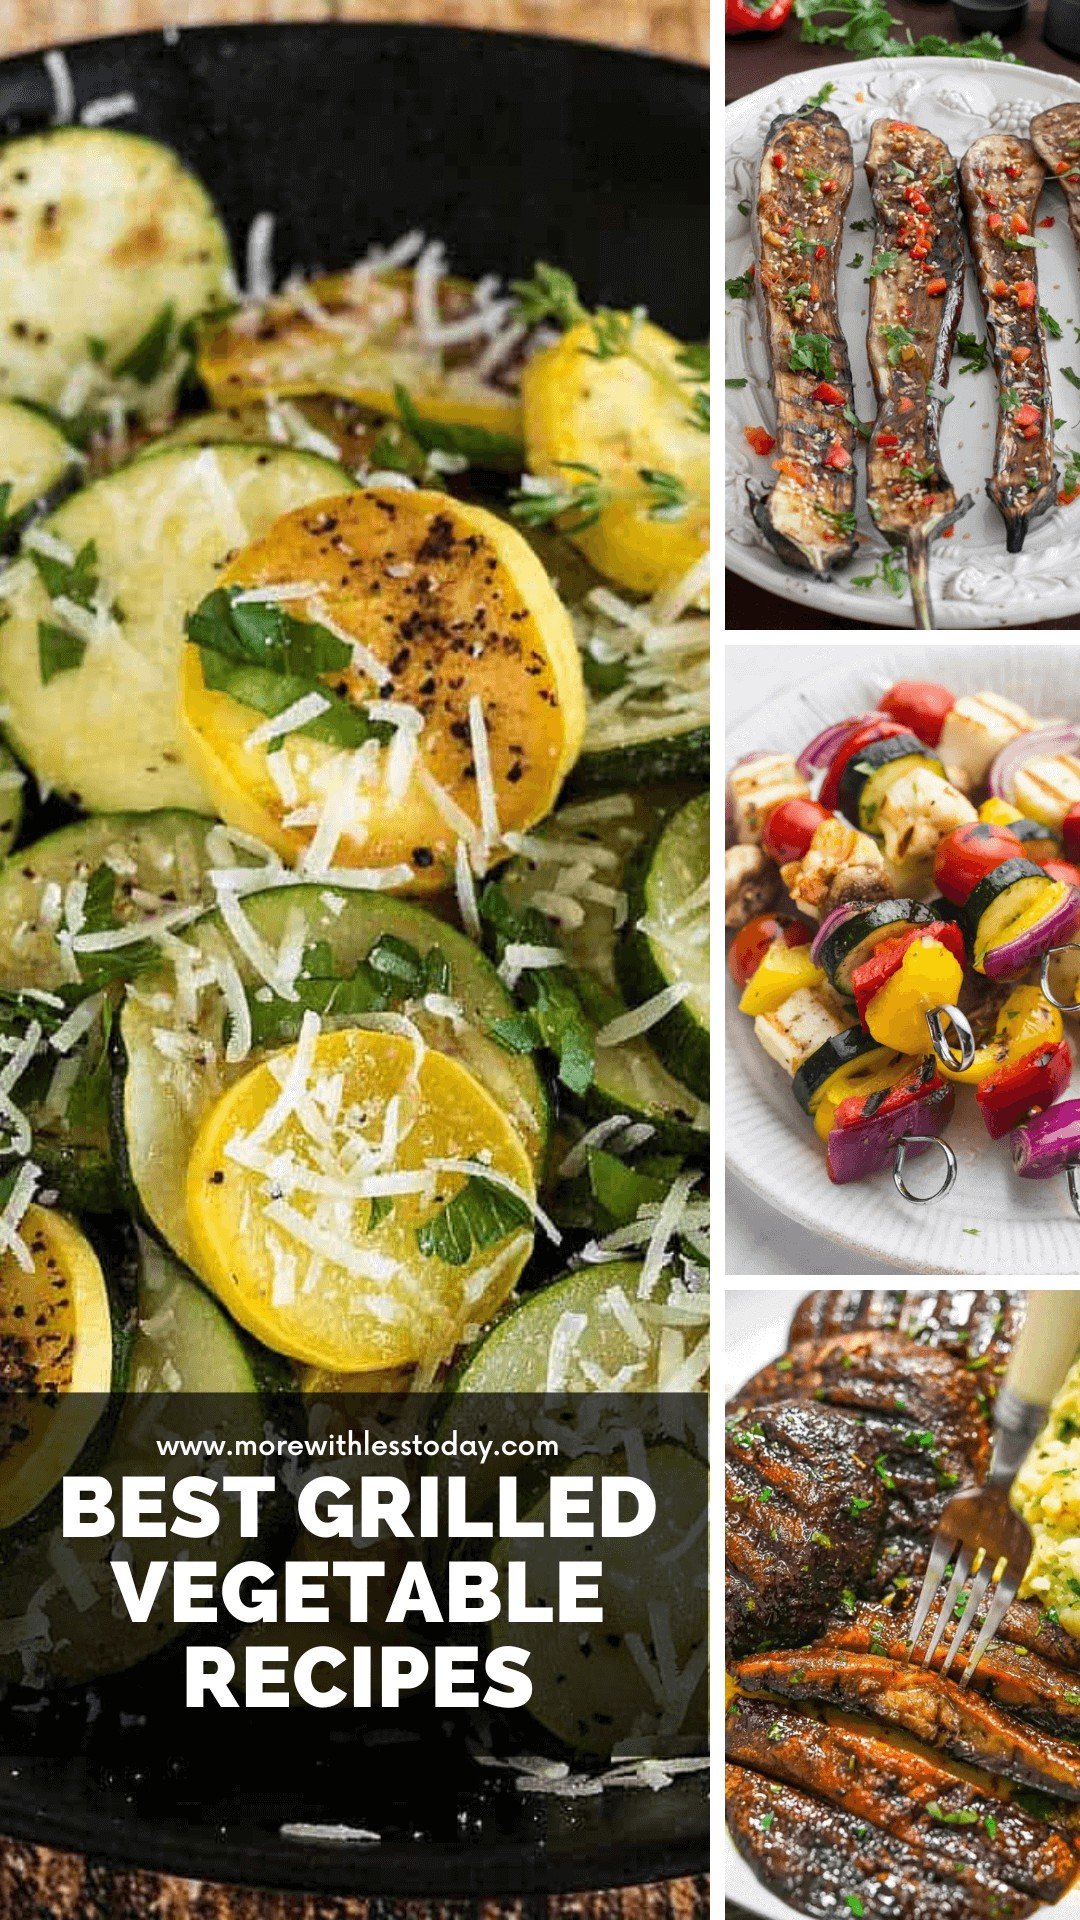 Best Grilled Vegetable Recipes - PIN